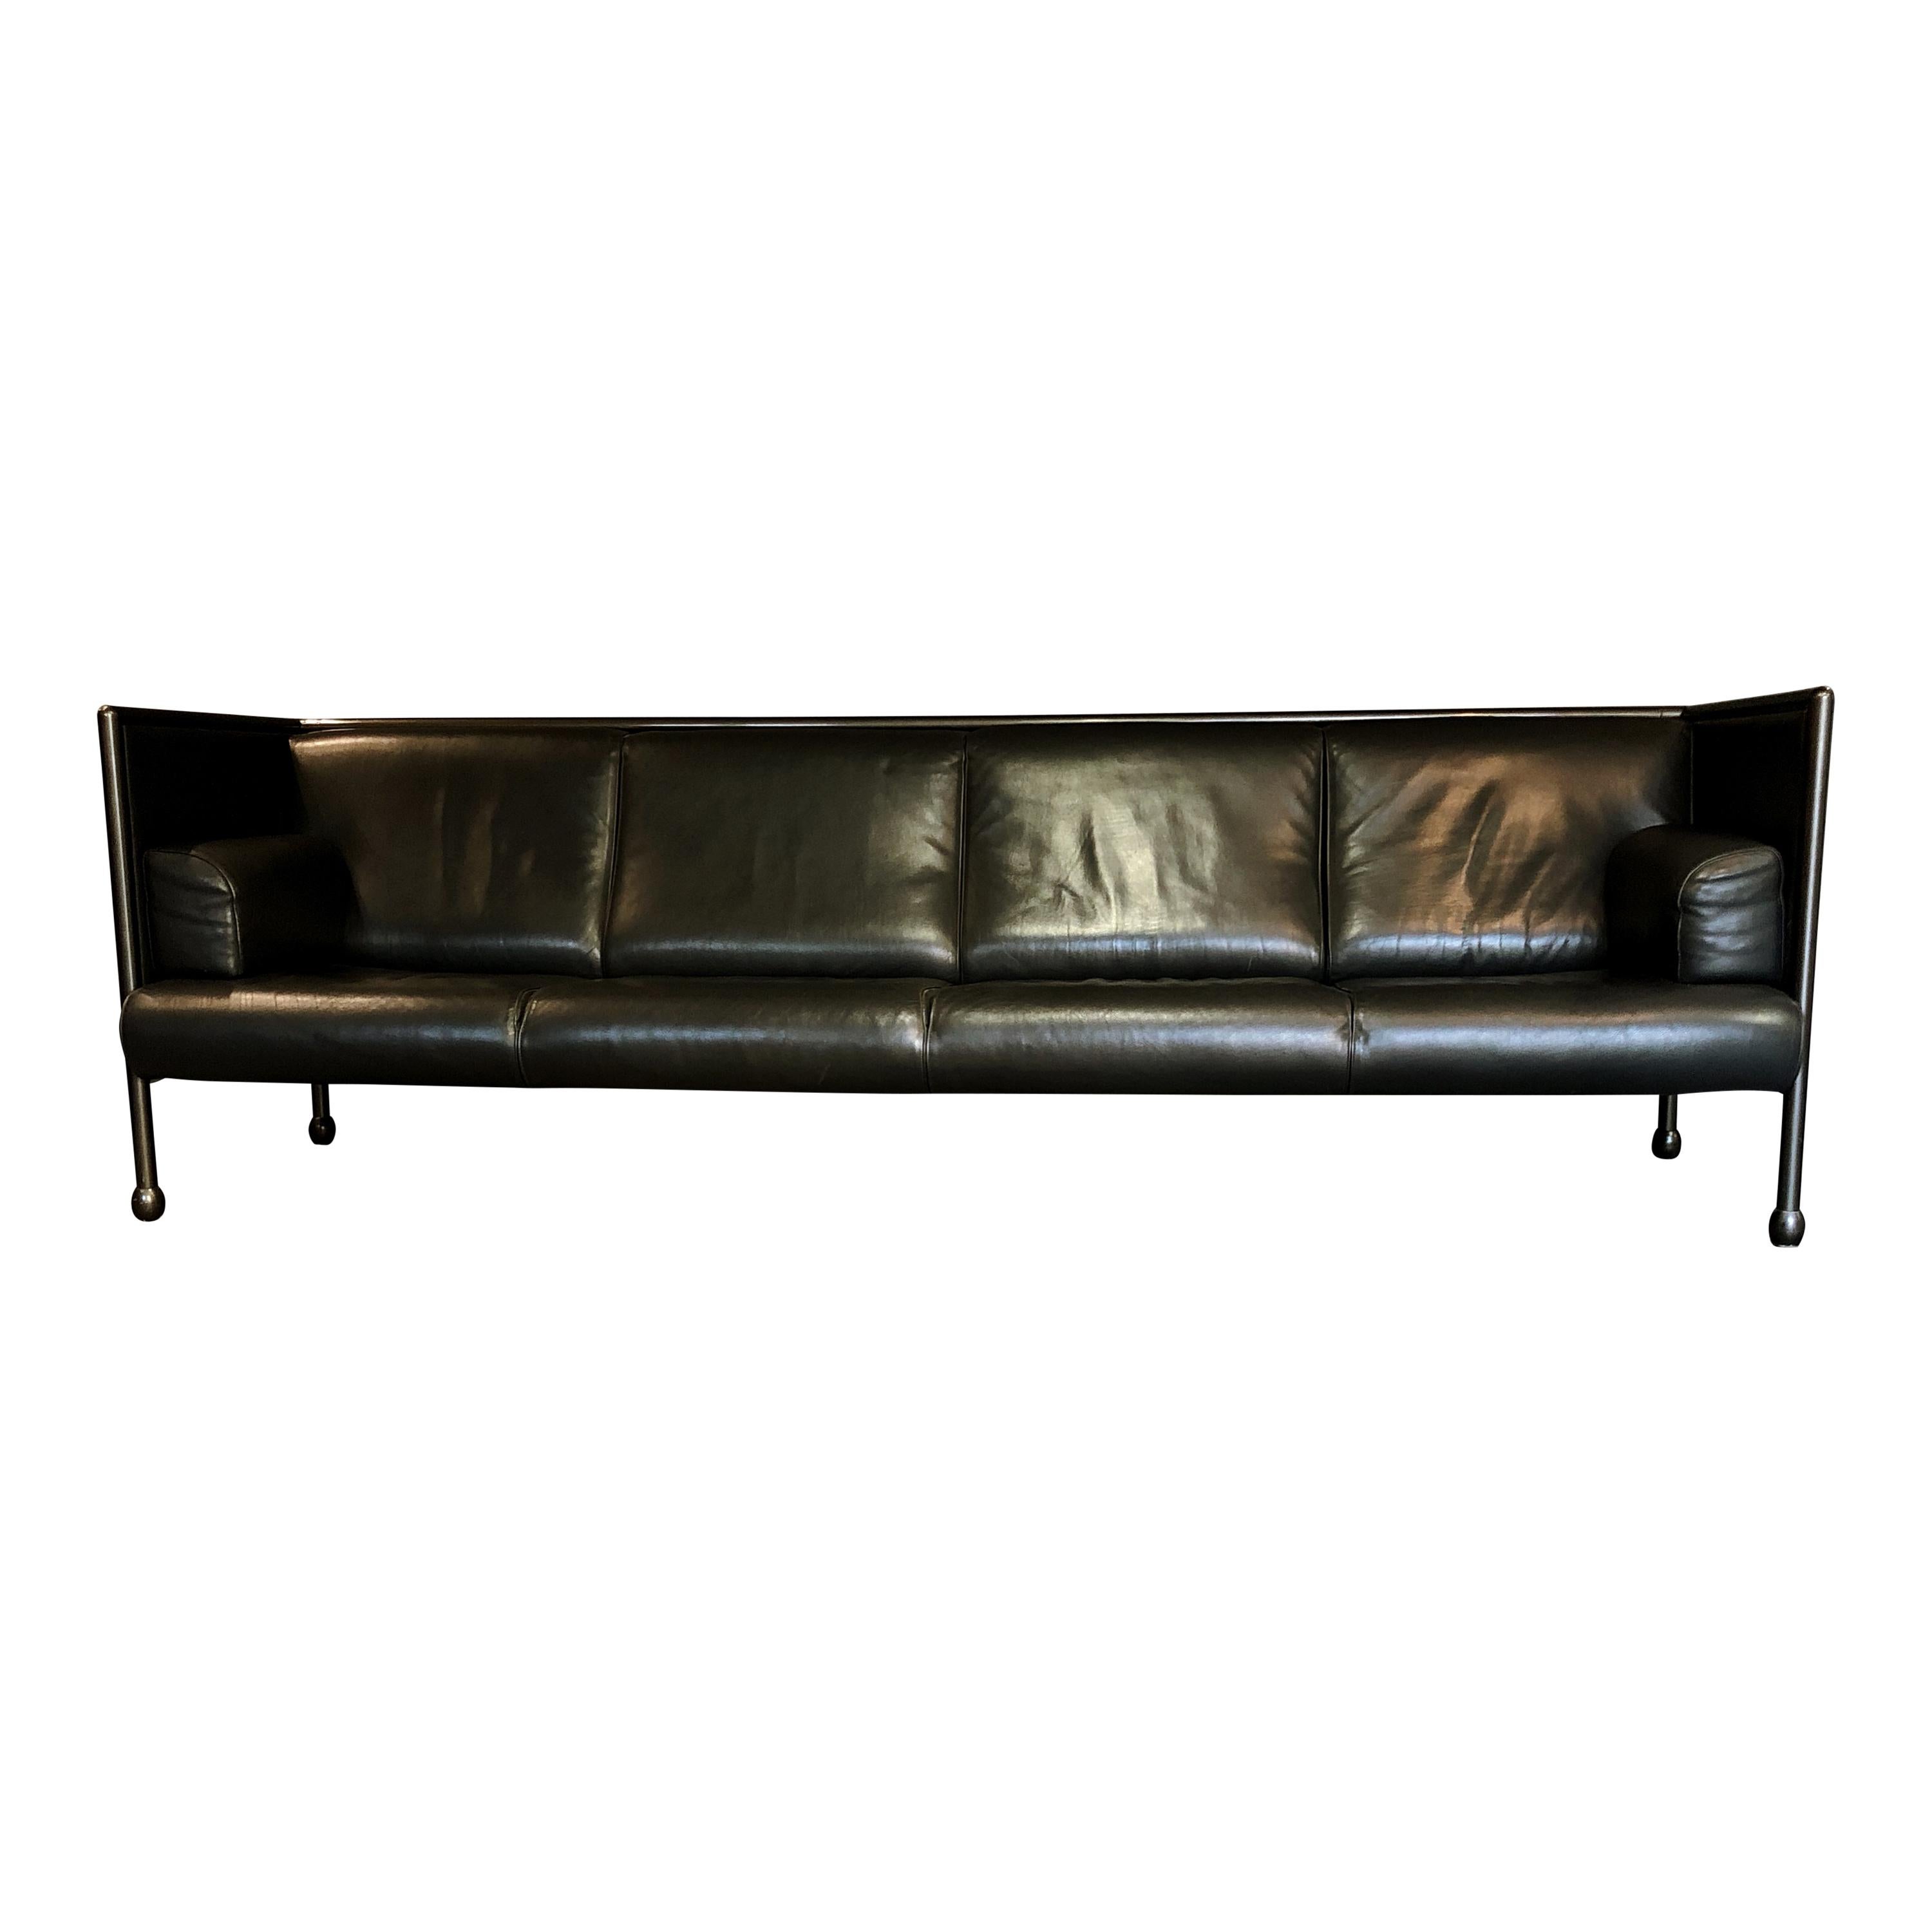 Danube sofa Model 850, four-seat, designed by Ettore Sottsass for Cassina. Iron structure covered with cream white cloth. Original black leather seat. Very good condition.

The 